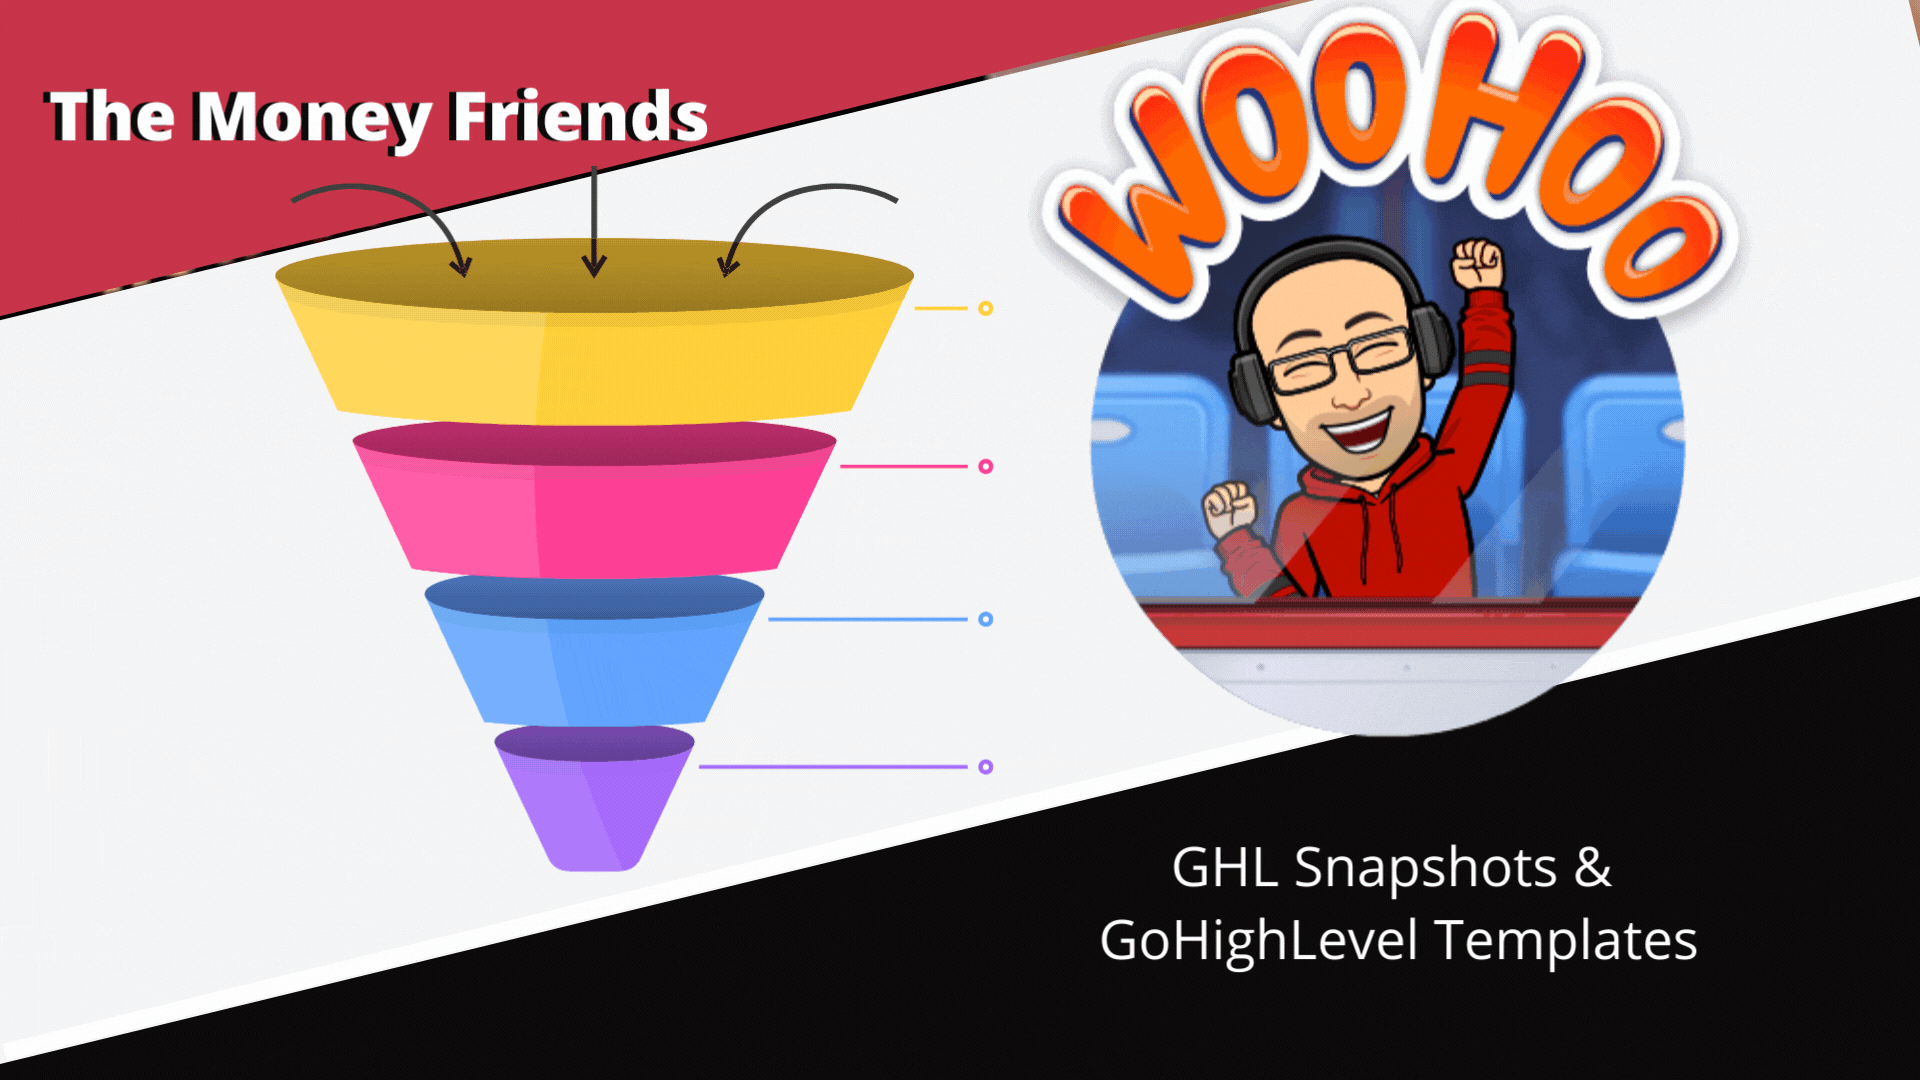 GHL snapshots and Gohighlevel templates